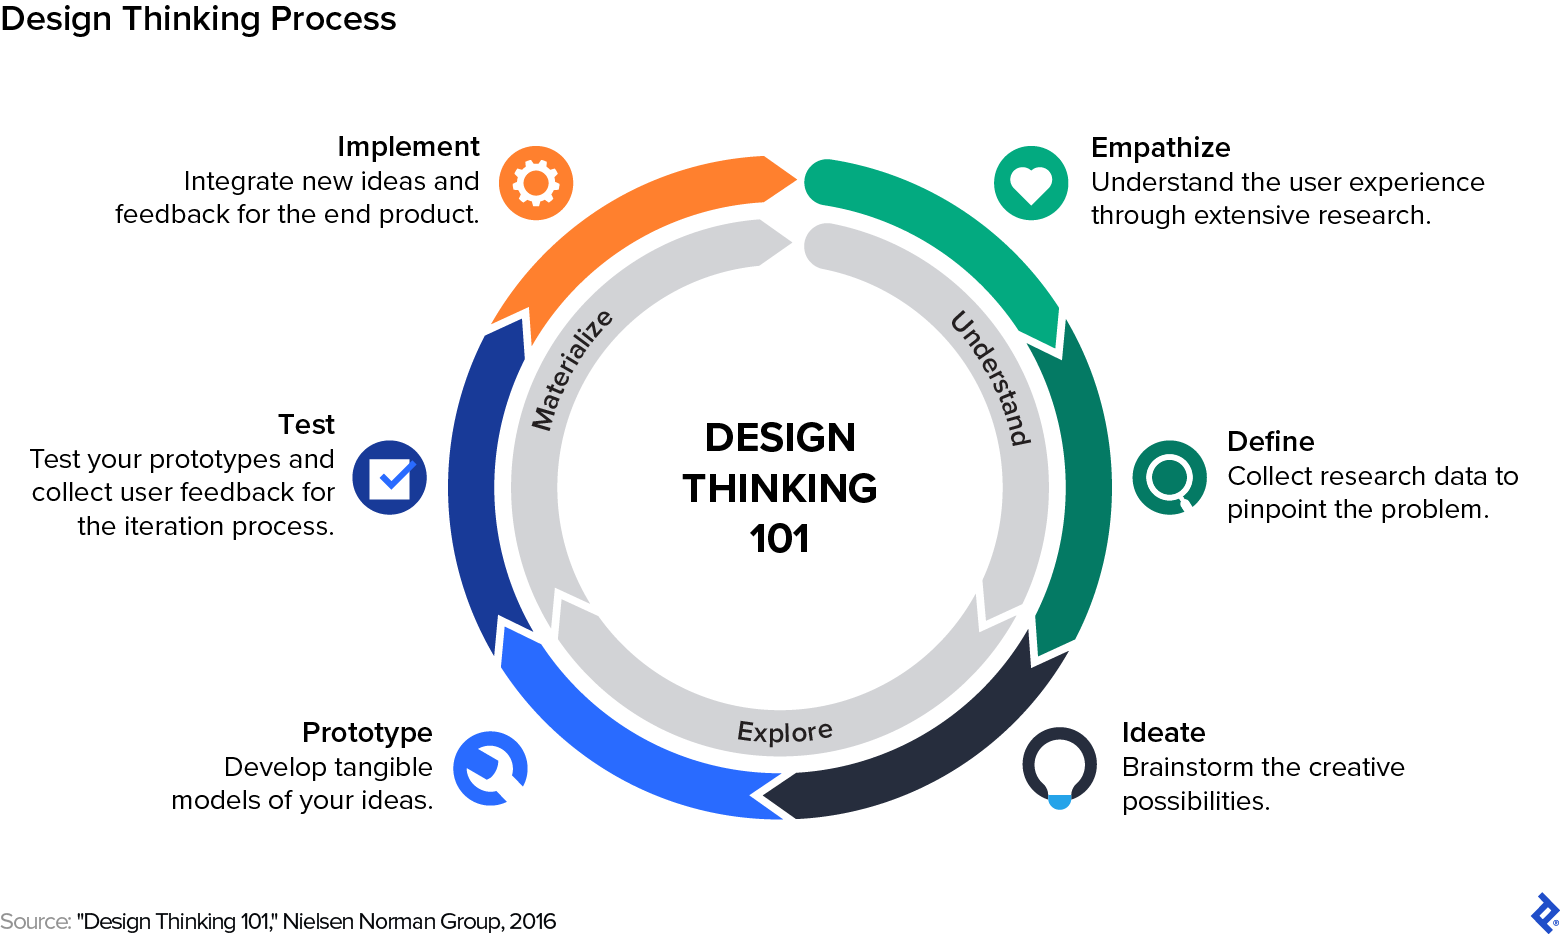 Design thinking is a six-step iterative process: empathize, define, ideate, prototype, implement.